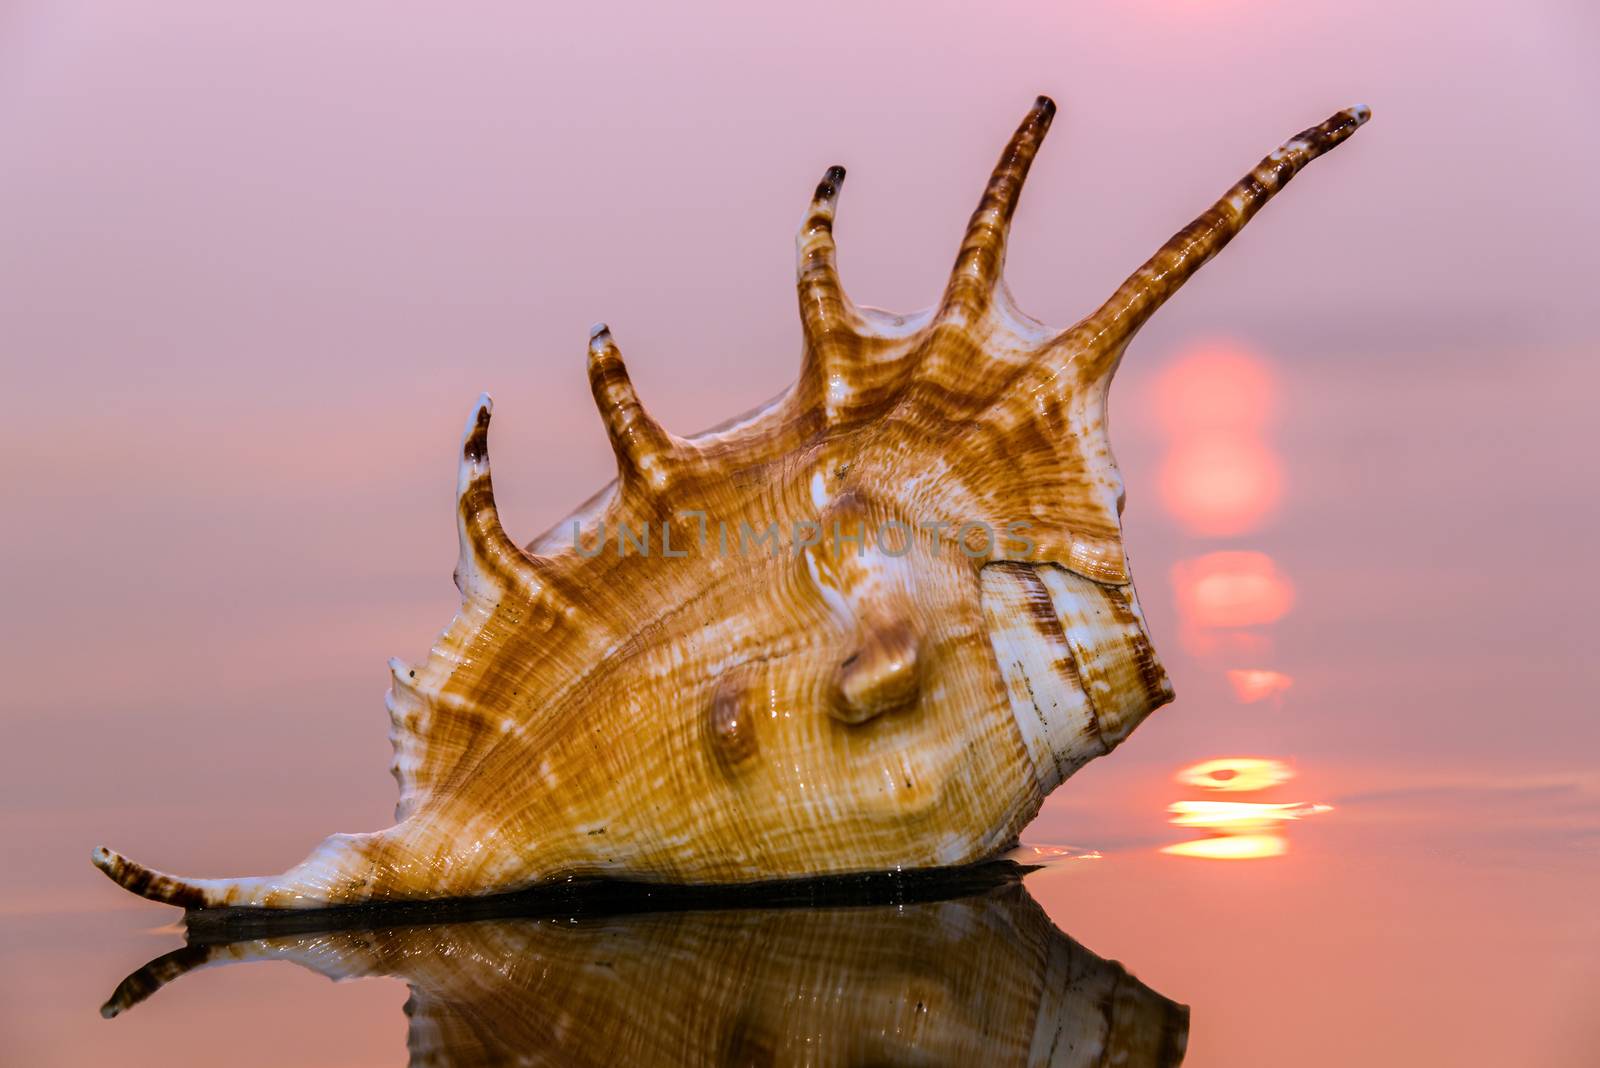 Conch shell on beach by neelsky